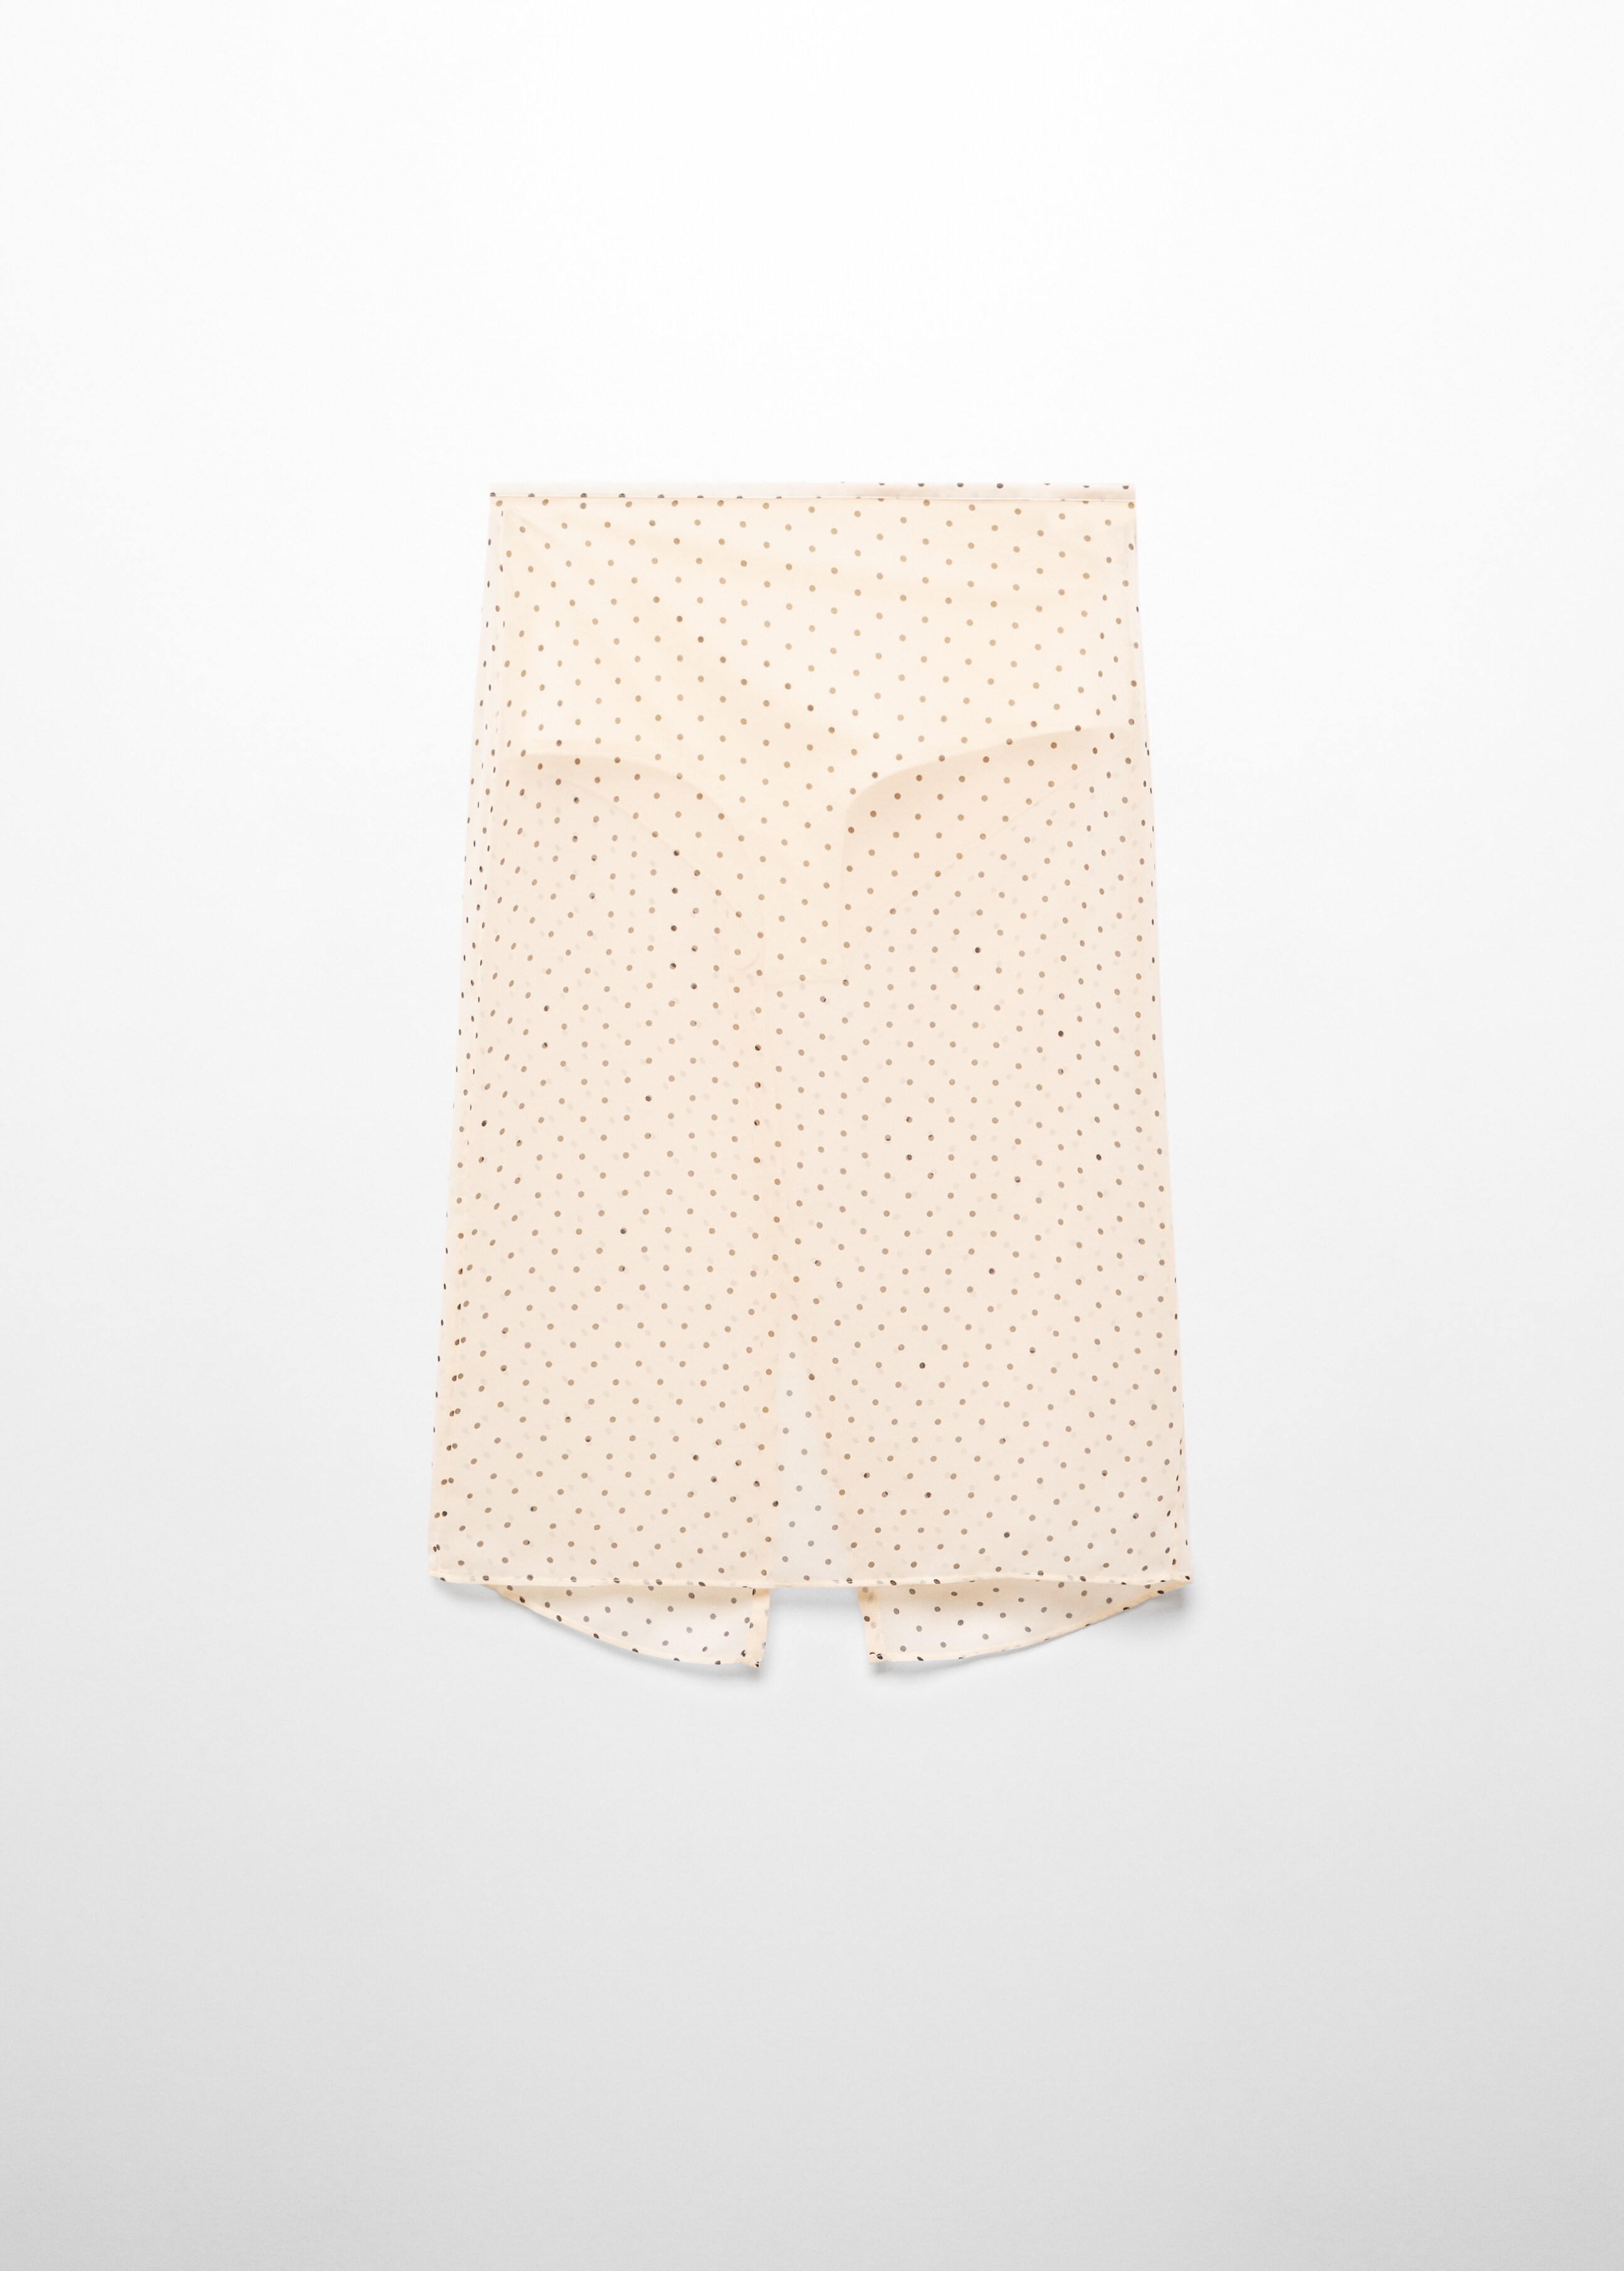 Semi-transparent polka-dot skirt - Article without model